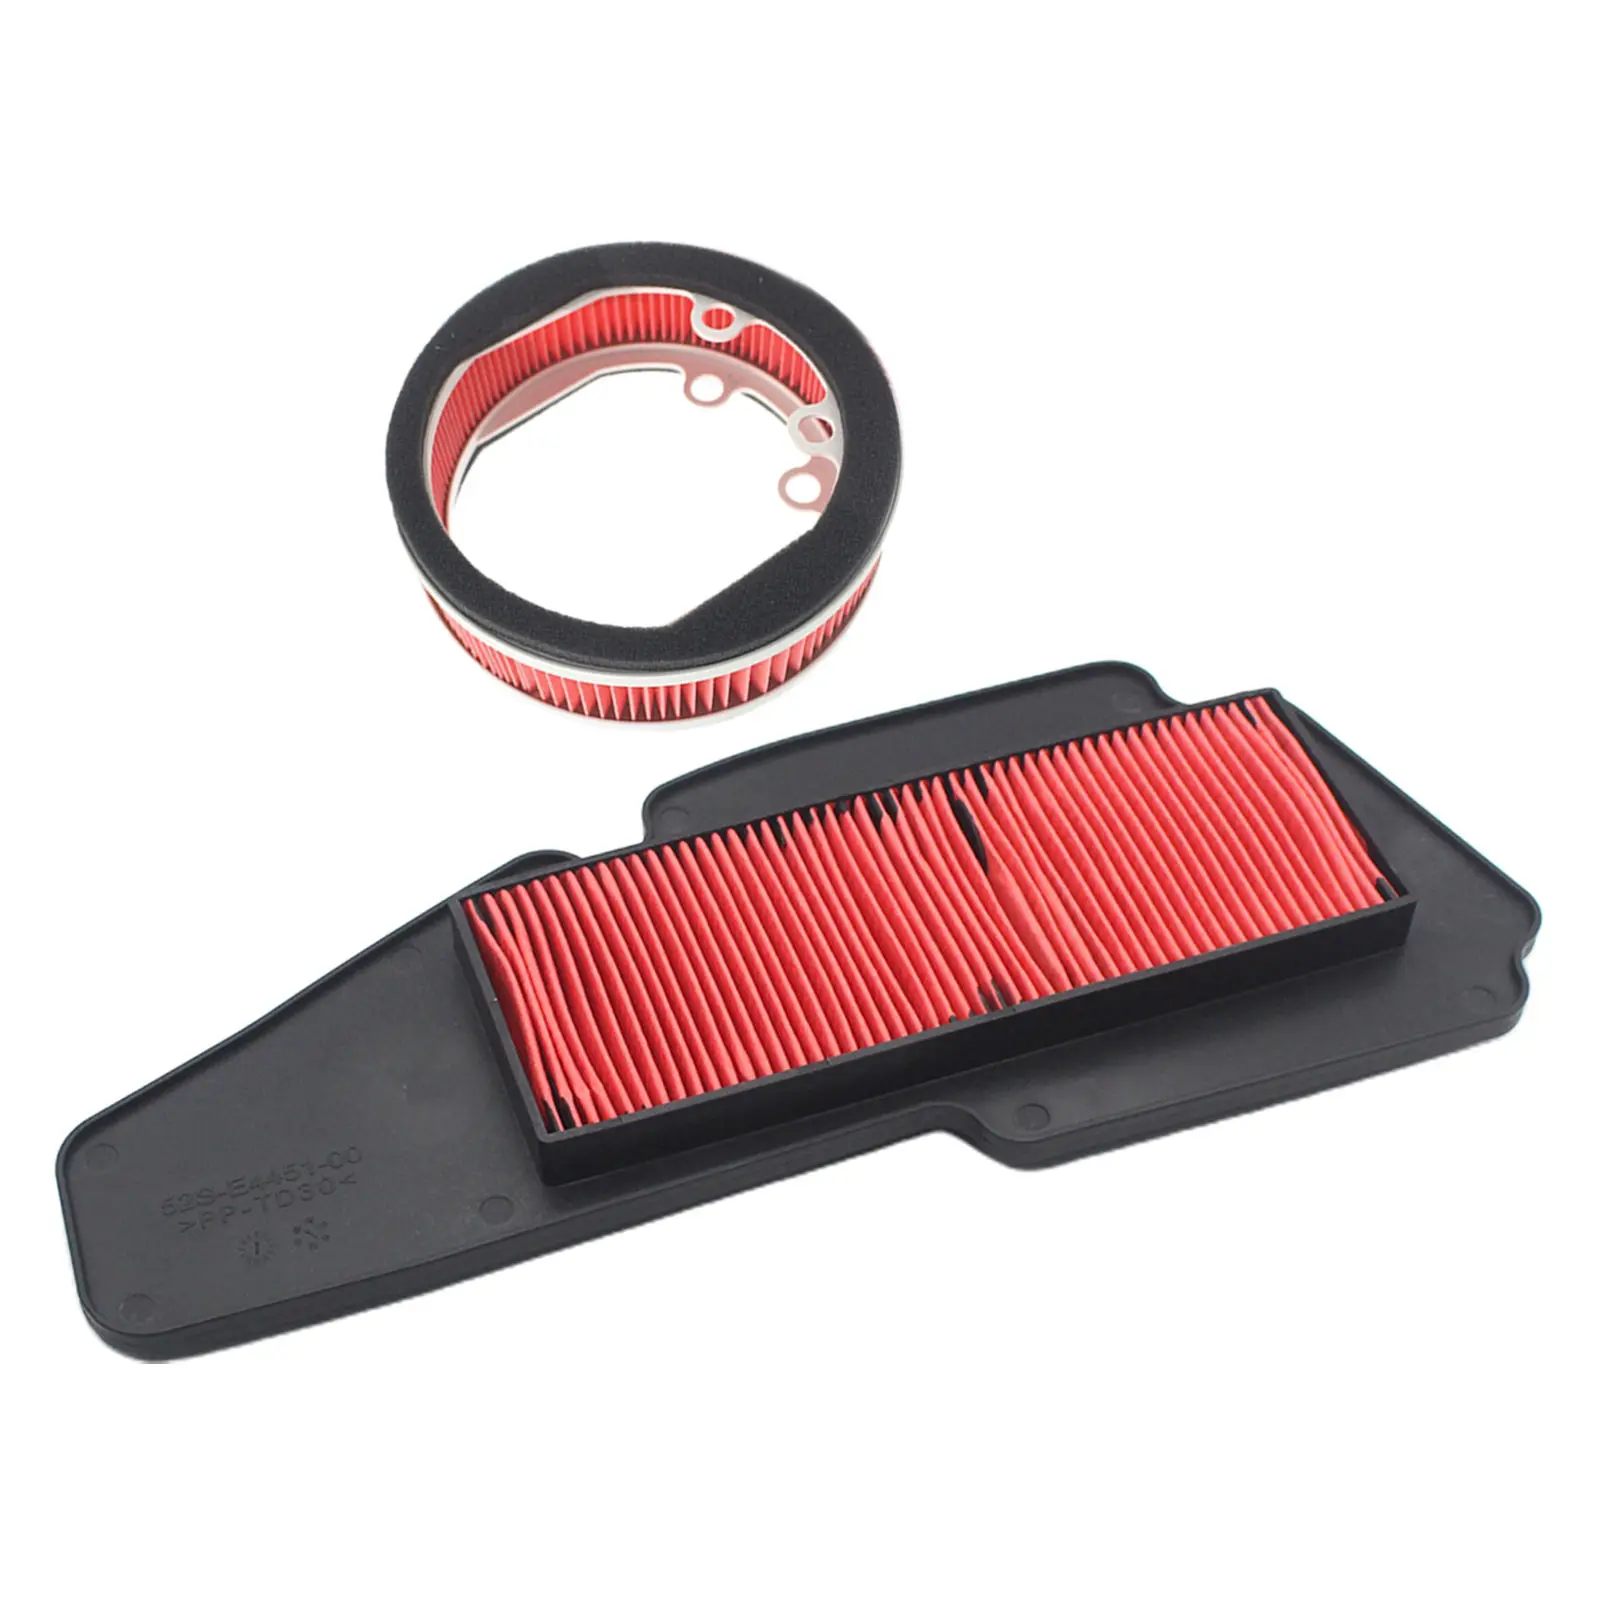 Engine Air Filter High Performance Motorcycle Accessories Filter Replacements 360x150x140mm